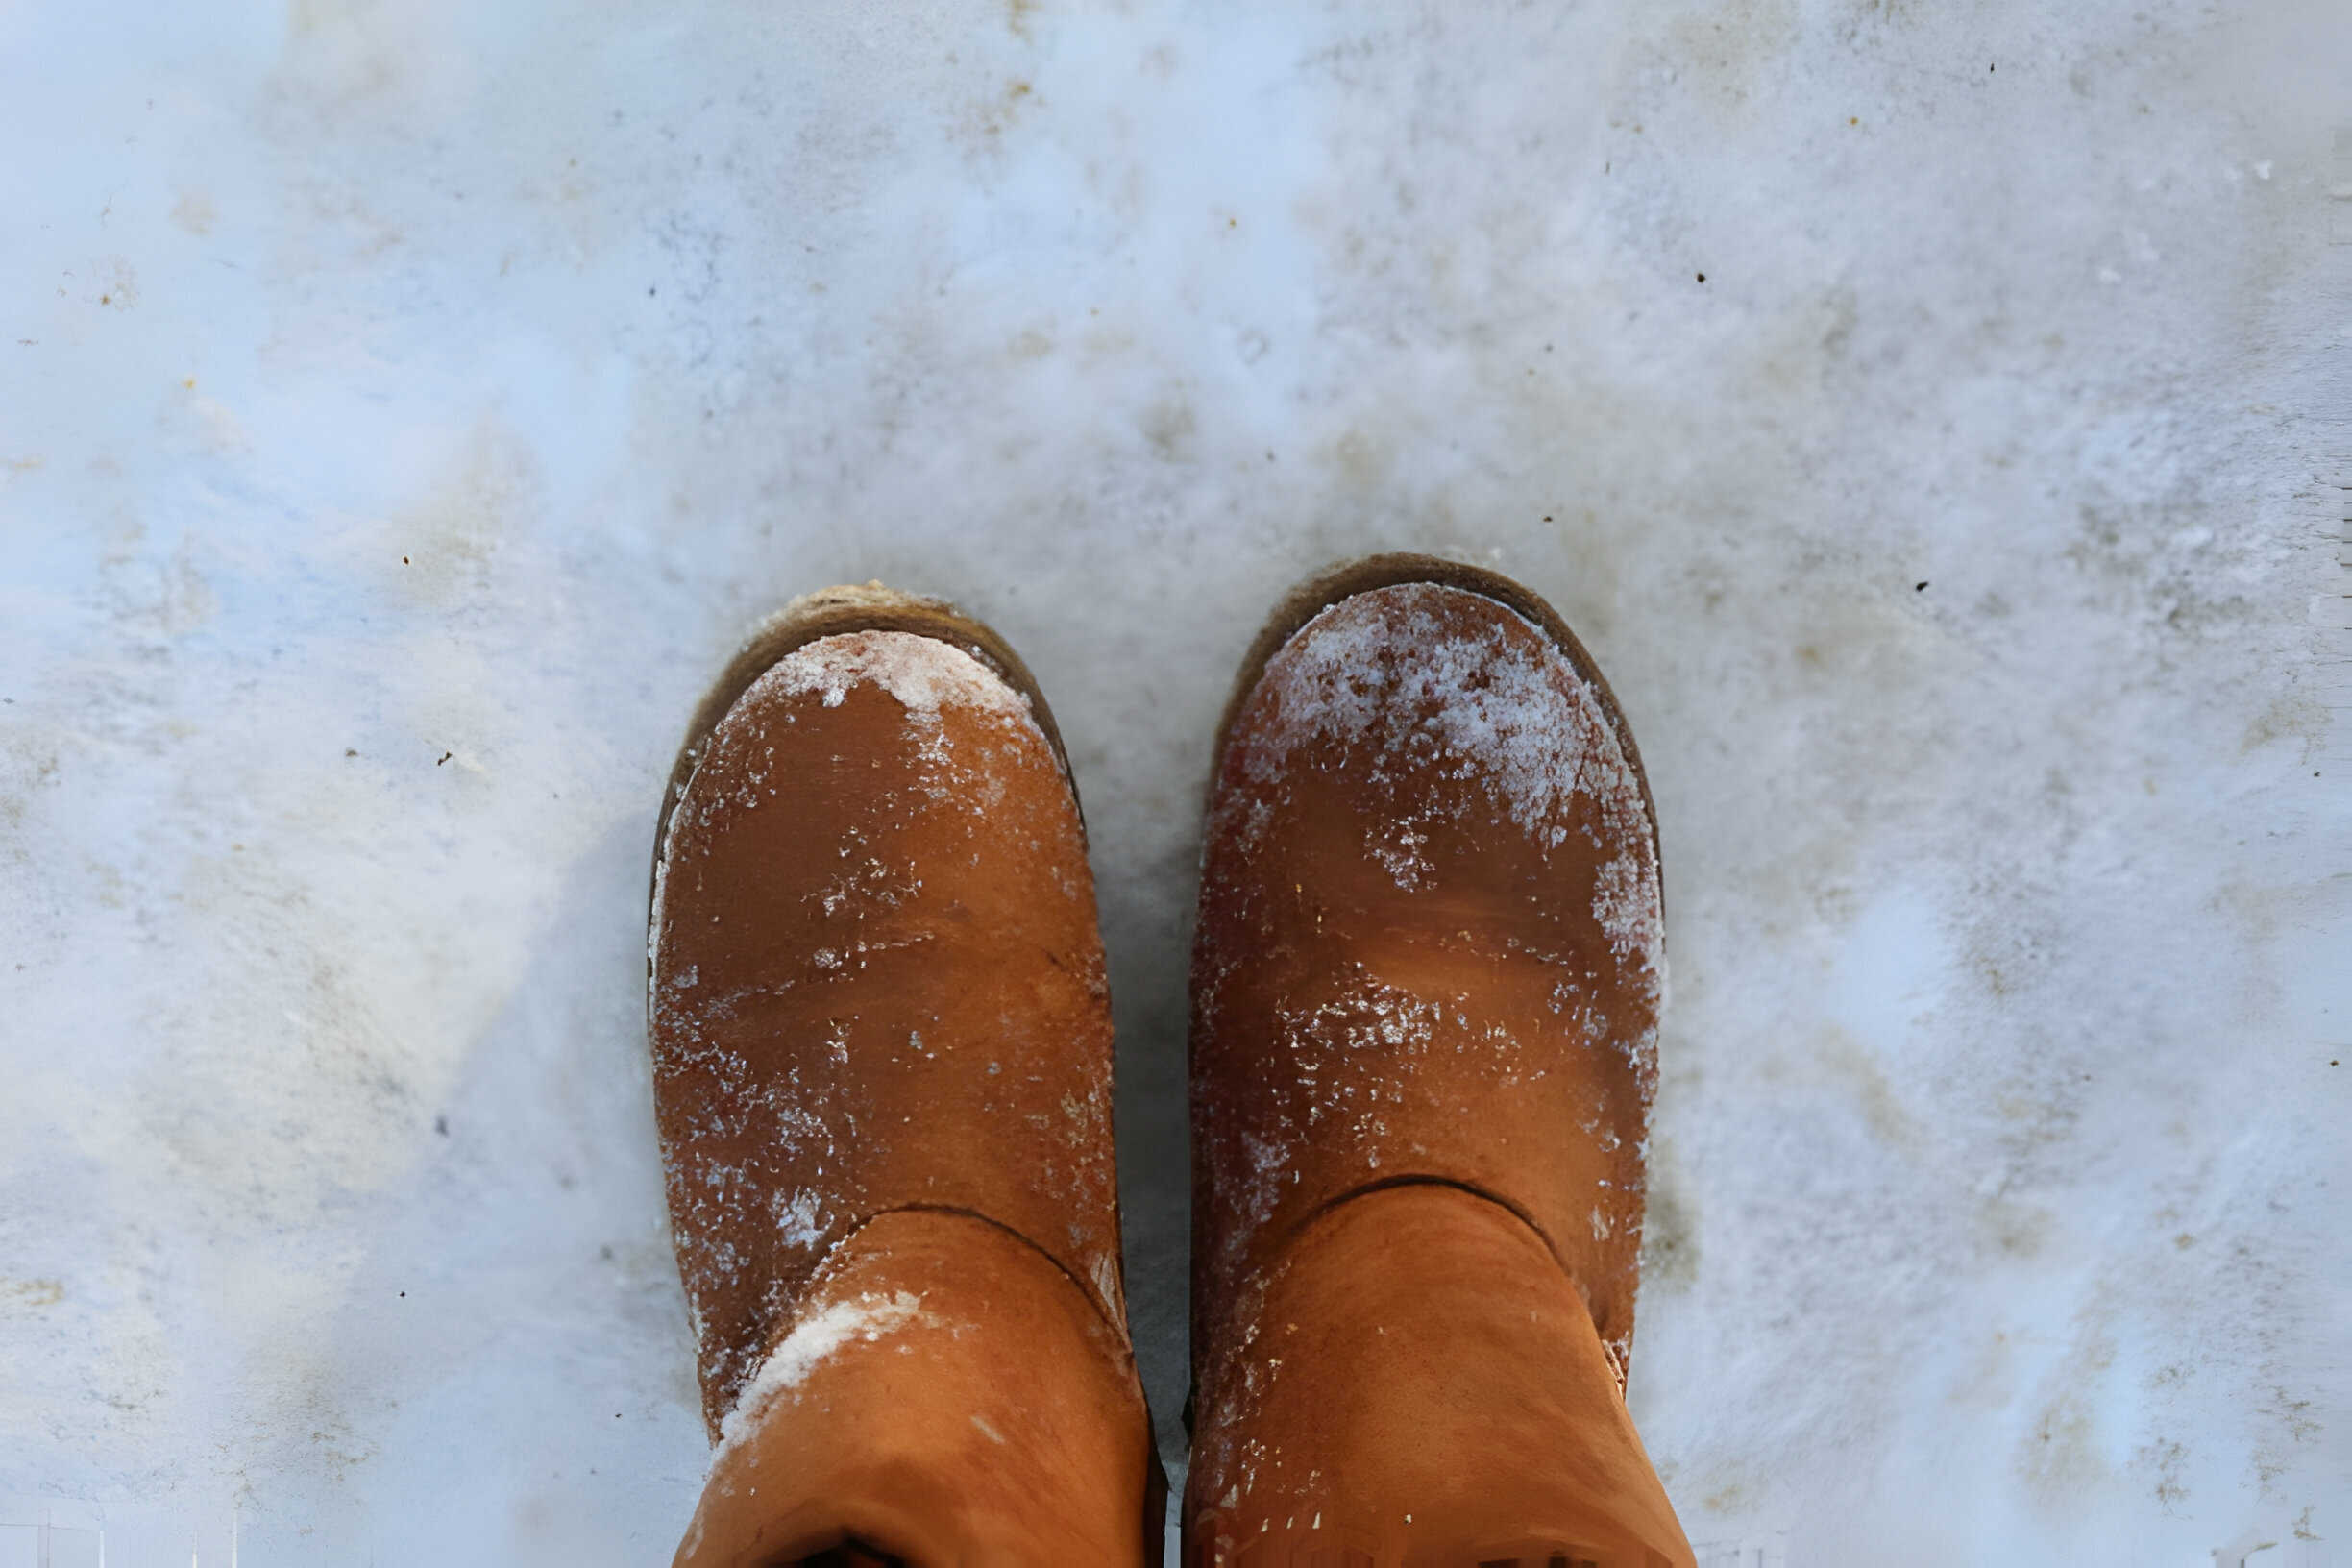 How to Clean Uggs Tidyhere Image of an Ugg Boots in the Snow